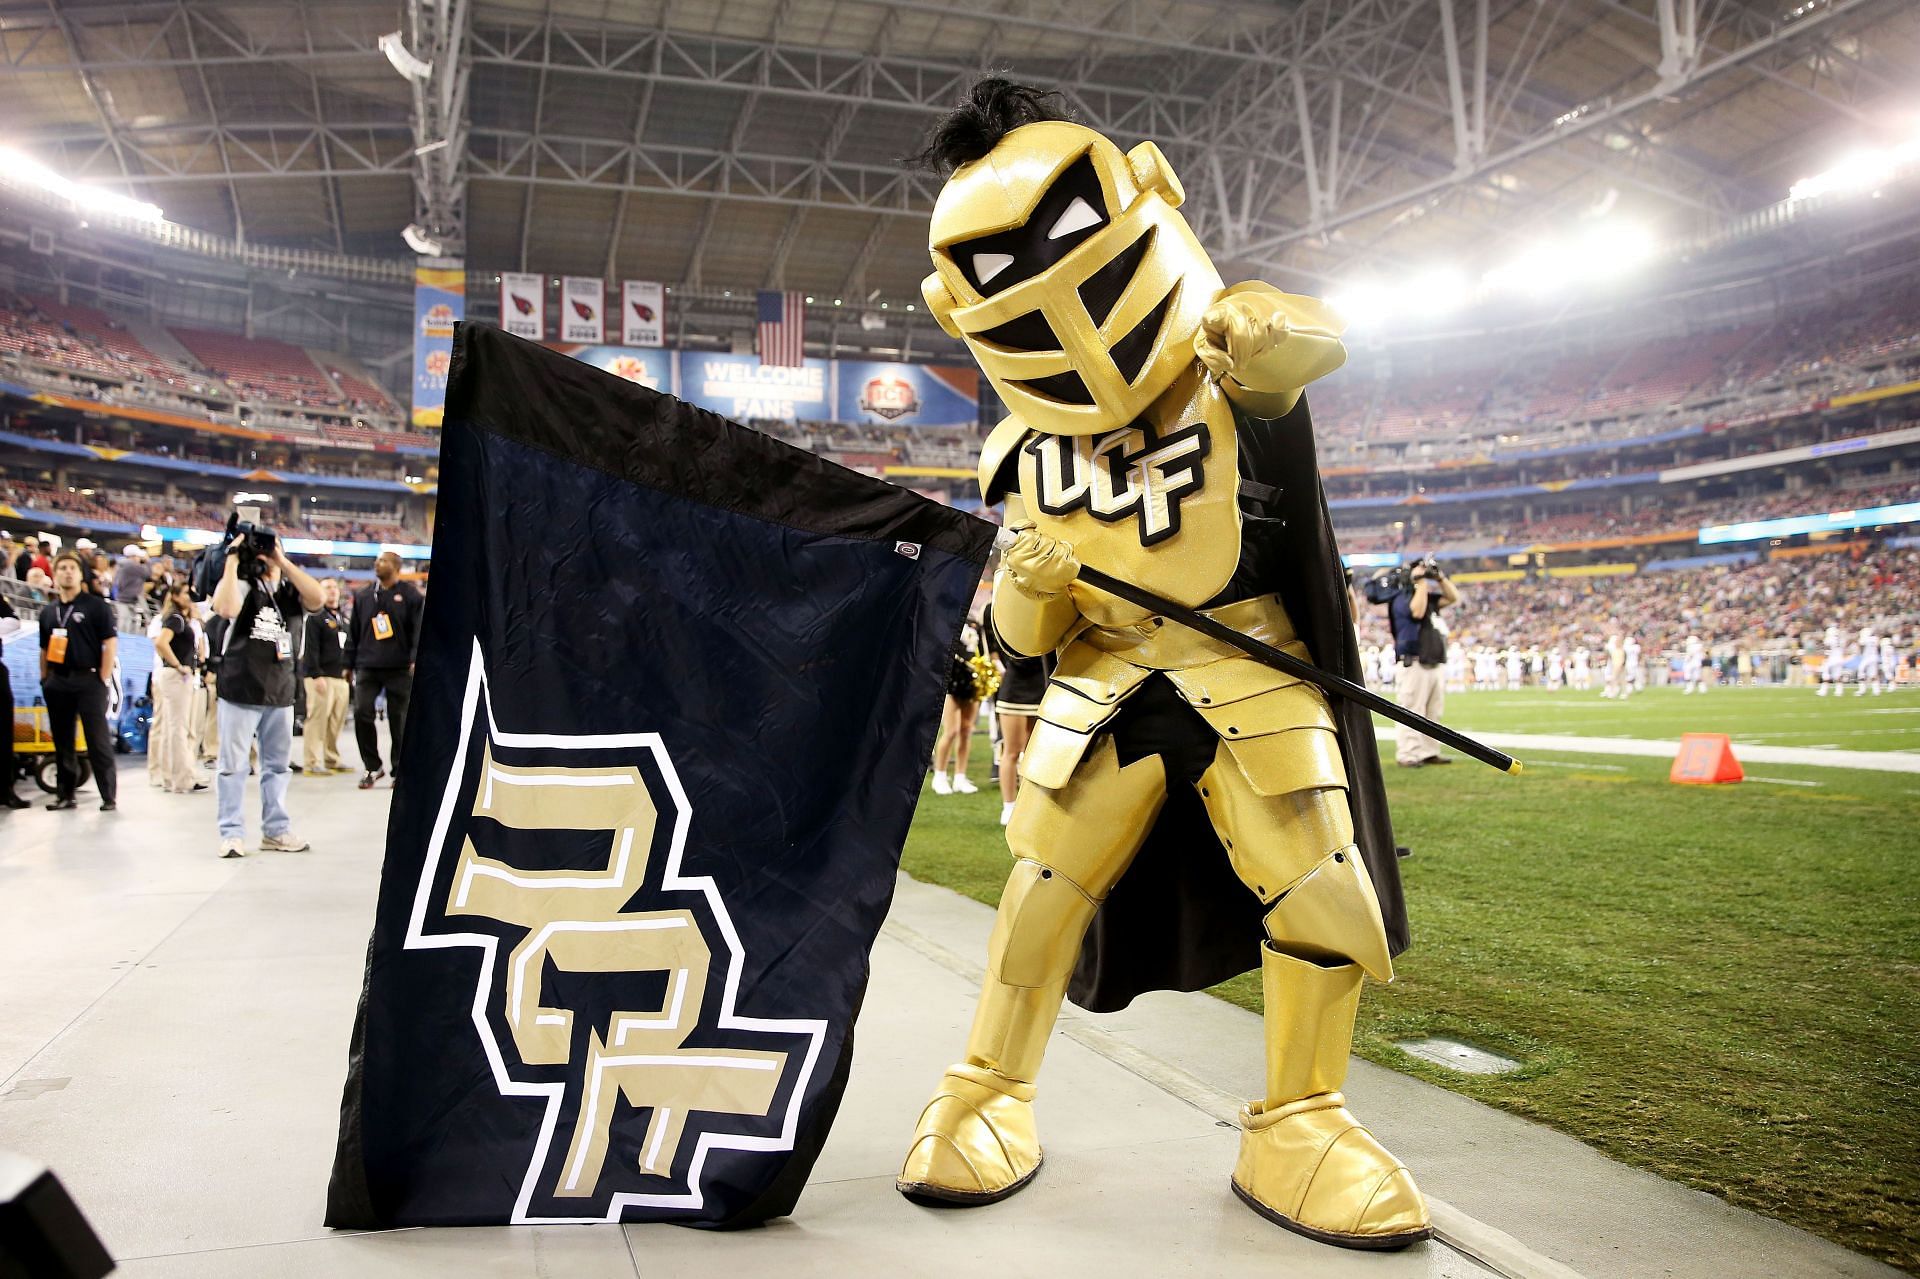 What is the UCF mascot? A sneak peak into the university's athletic culture